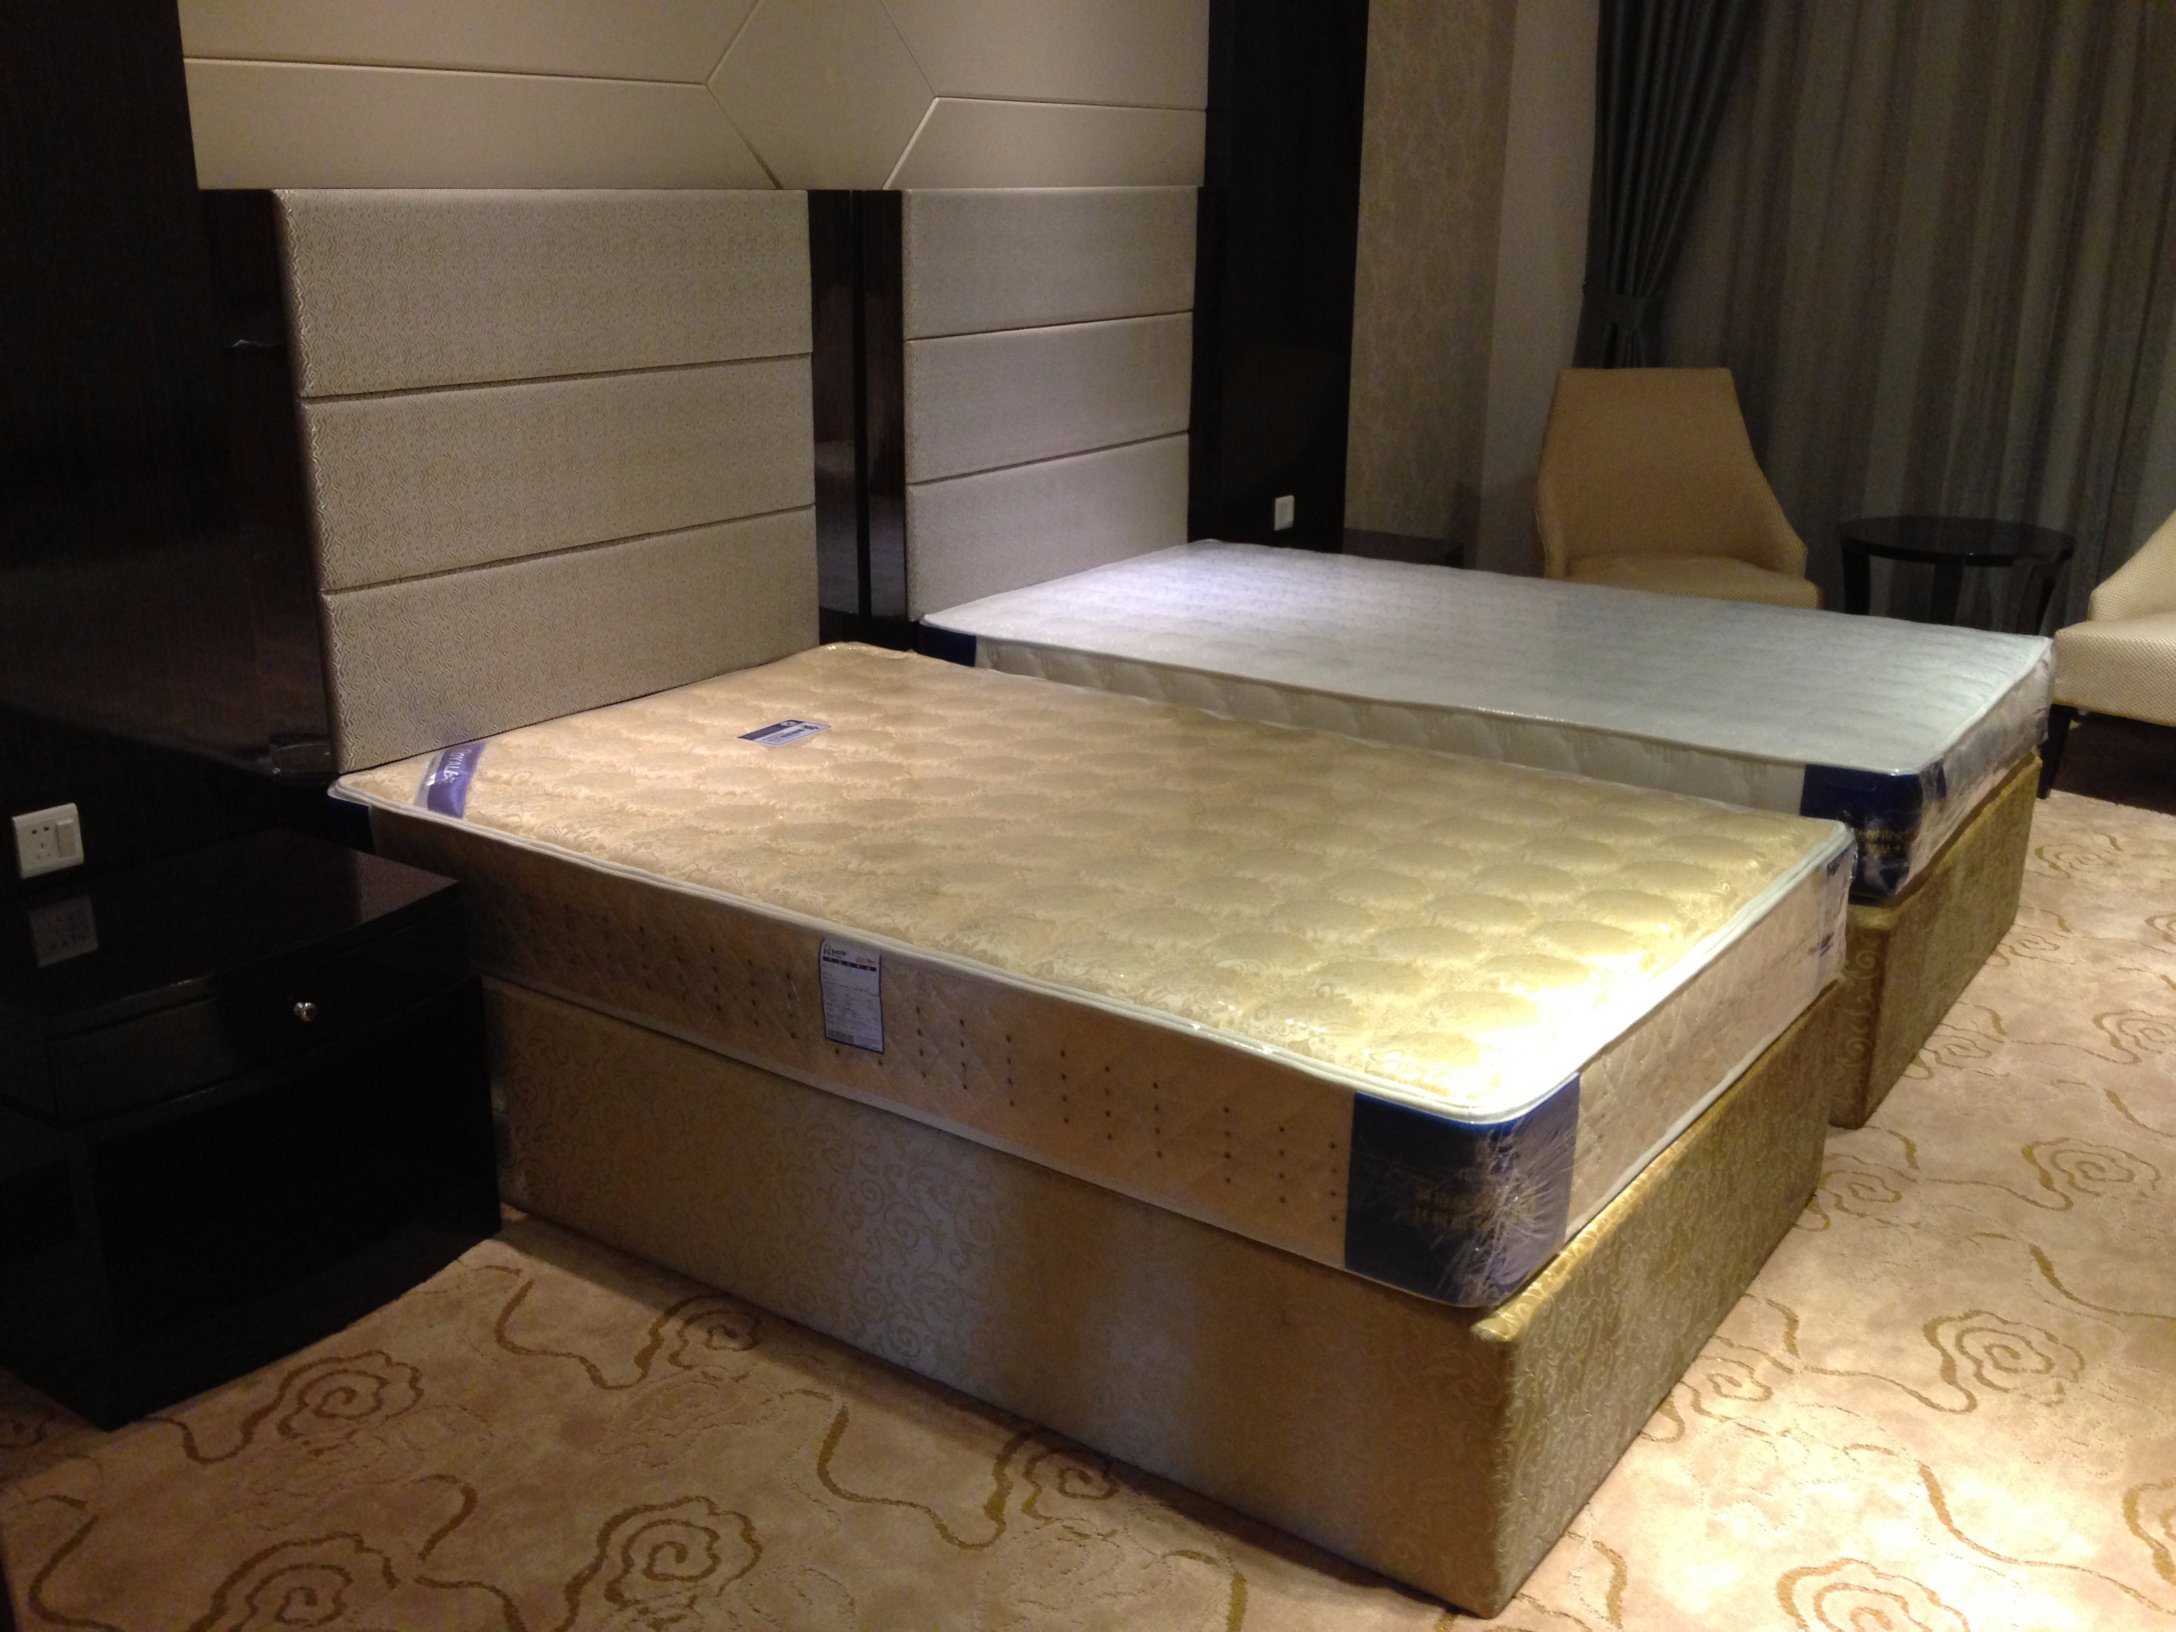 Hotel Furniture/Luxury Hotel Double Bedroom Furniture/Standard Hotel Double Bedroom Suite/Double Hospitality Guest Room Furniture (NCHB-5001020511)